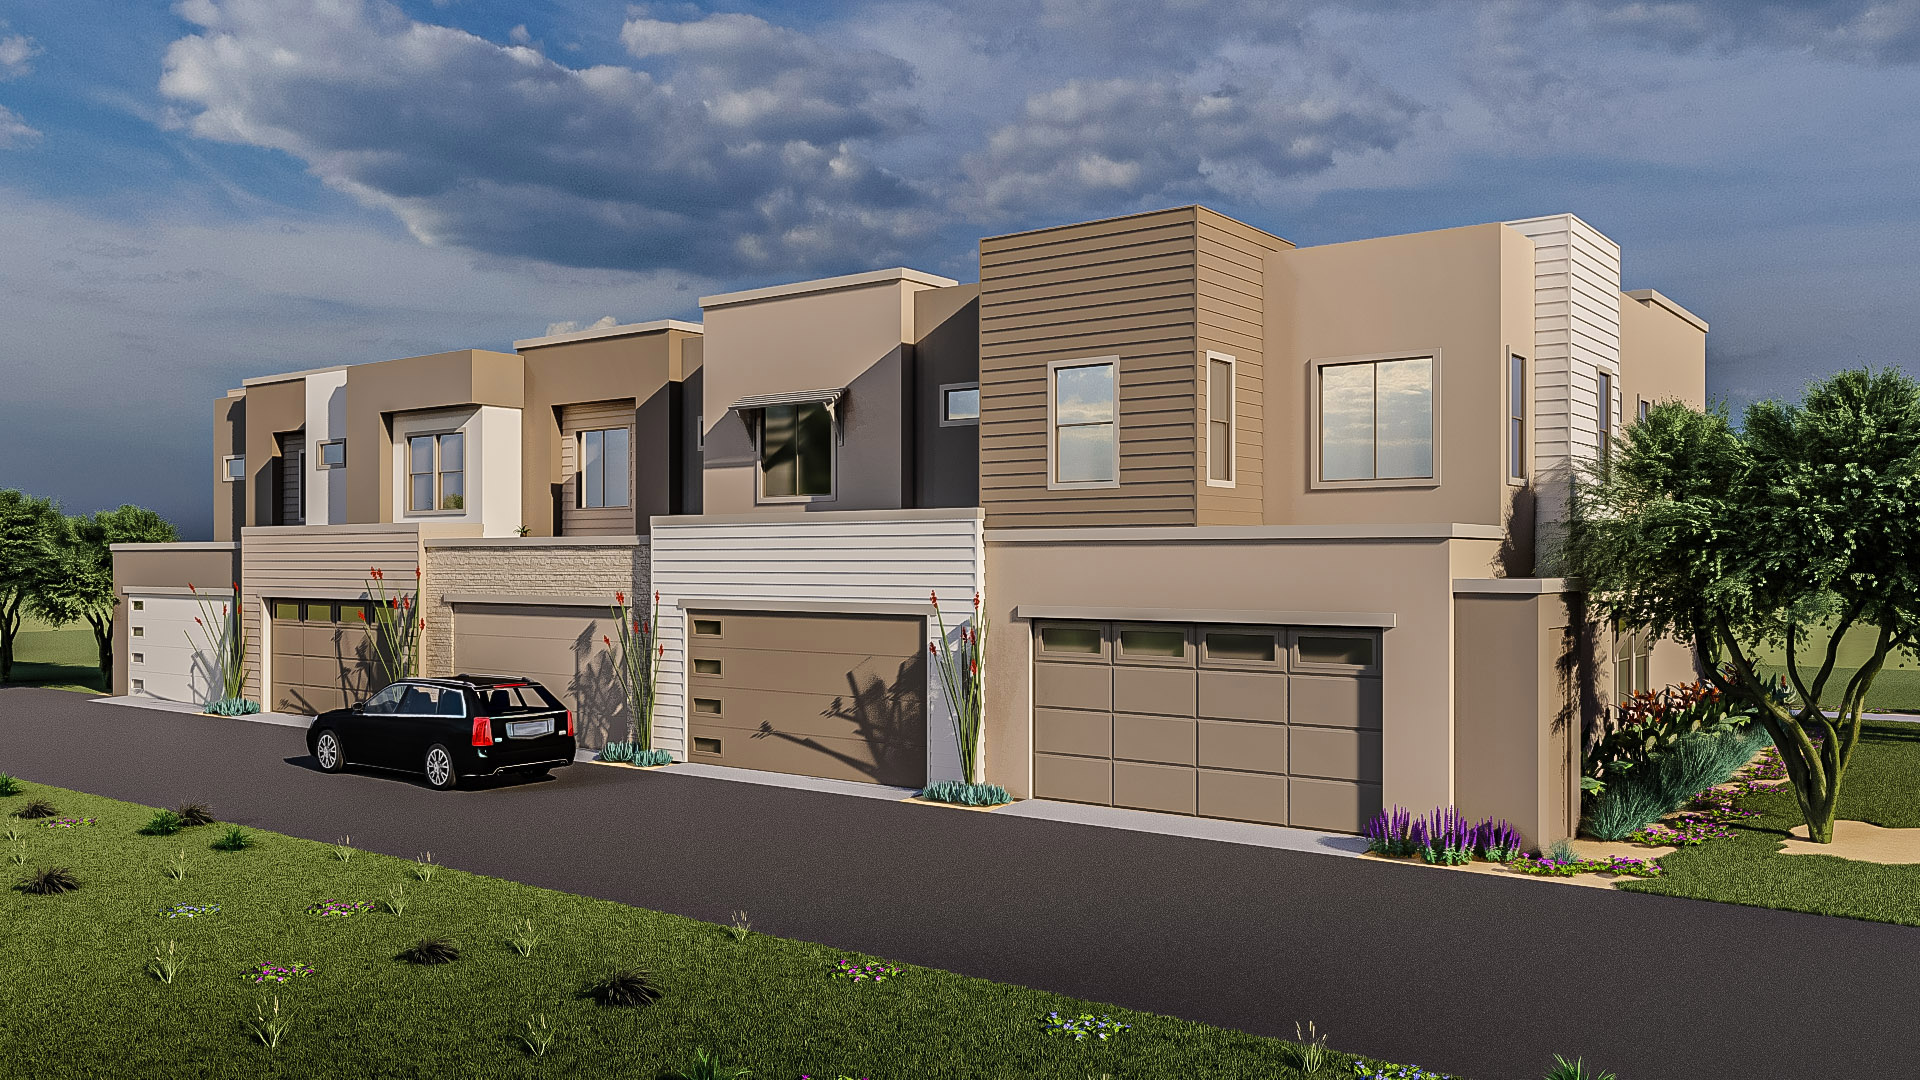 Family Development and Mosaic Break Ground on 209-Unit Town Germann Luxury Build-to-Rent Community Located in Gilbert, Arizona